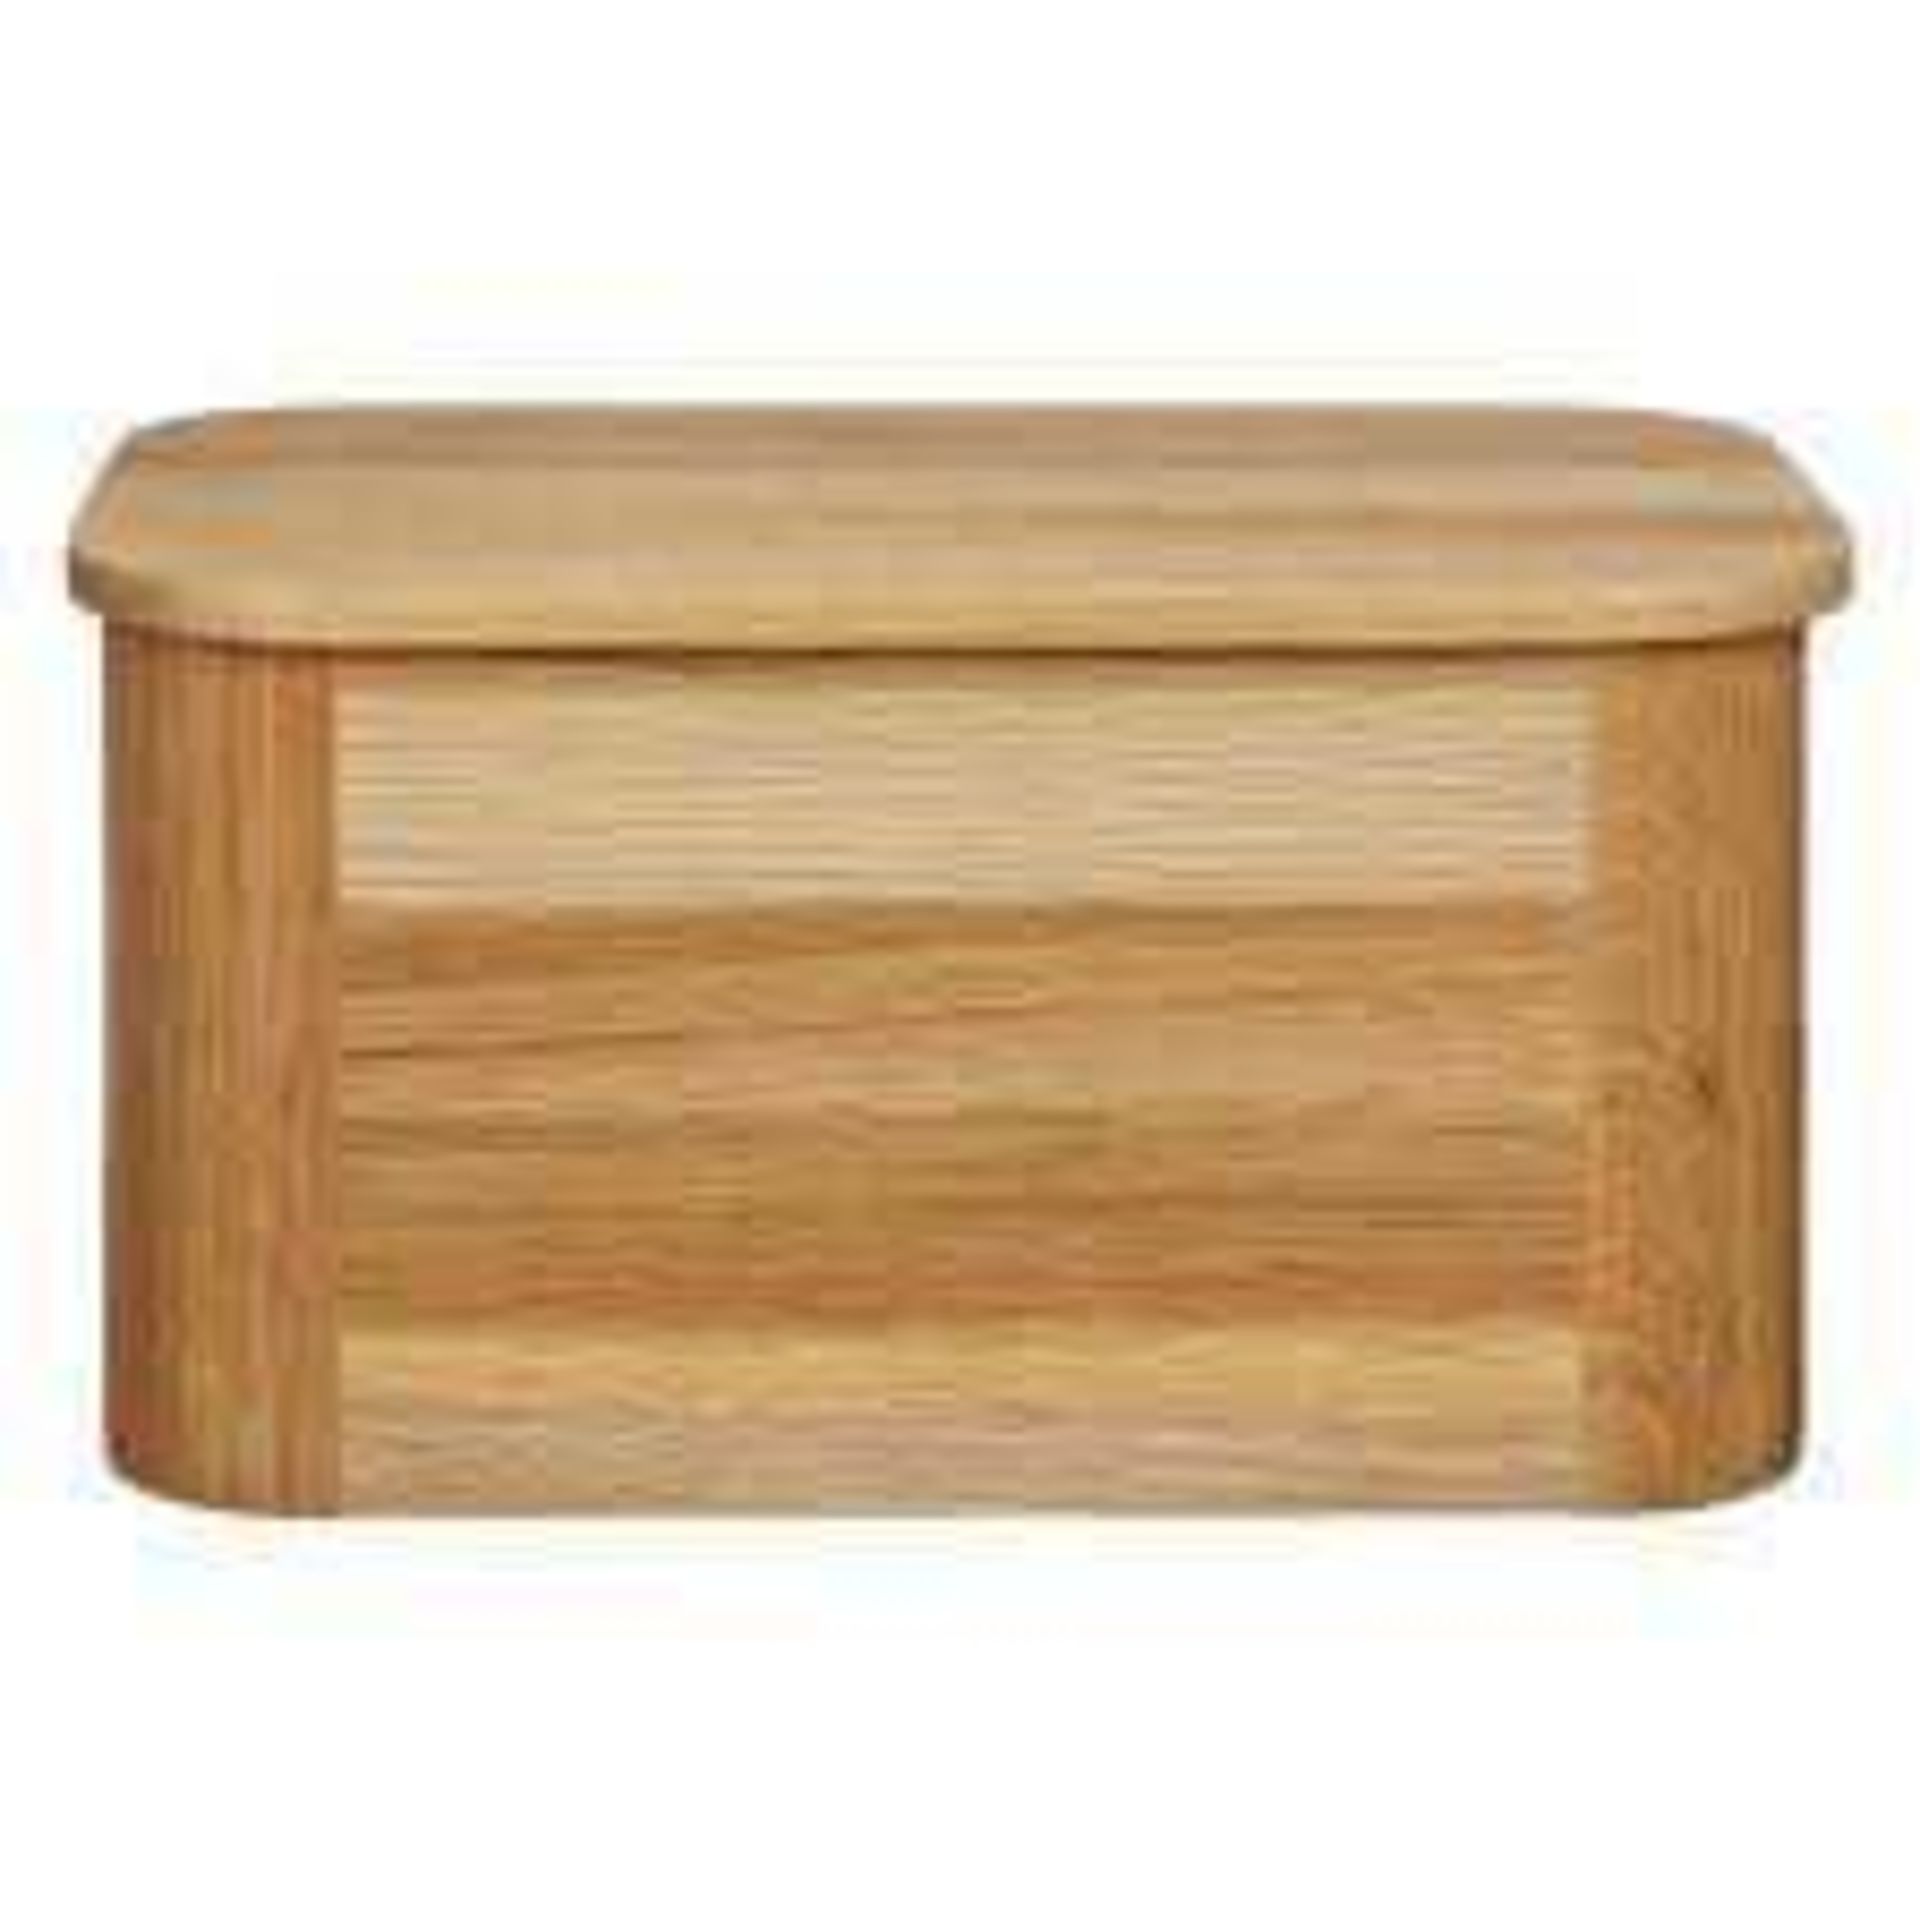 Combined RRP £150 Lot To Contain Unboxed Oak Bread Bin And Bagged Two Copper Handle Feature Pans. - Image 2 of 2